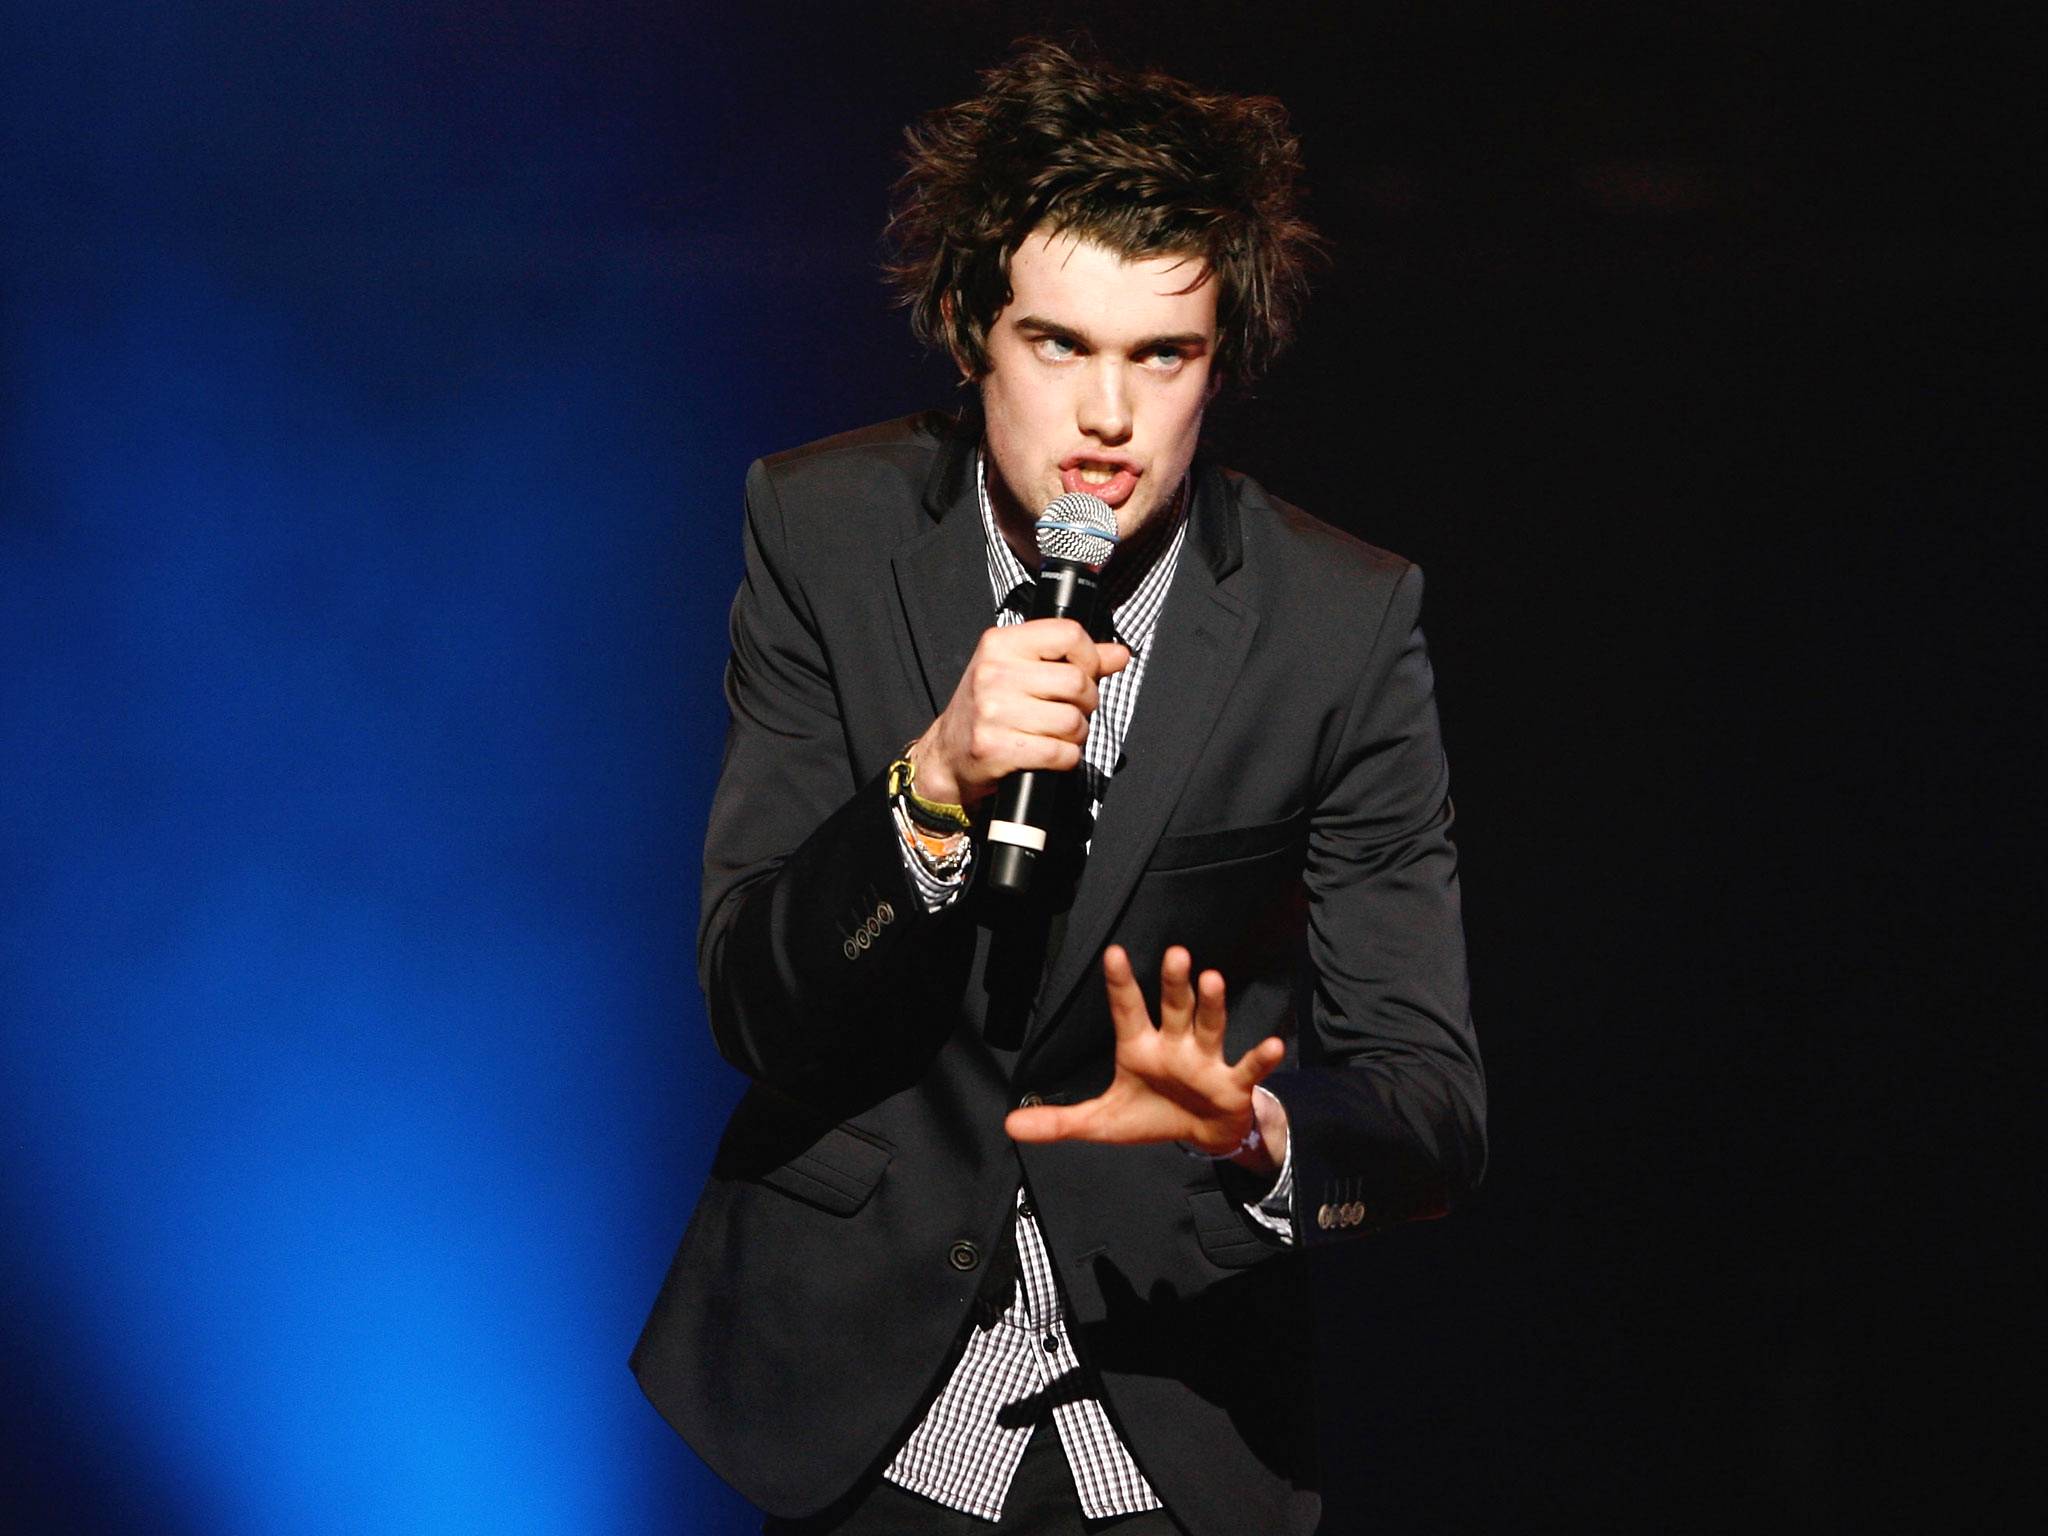 Comedian Jack Whitehall performs on stage